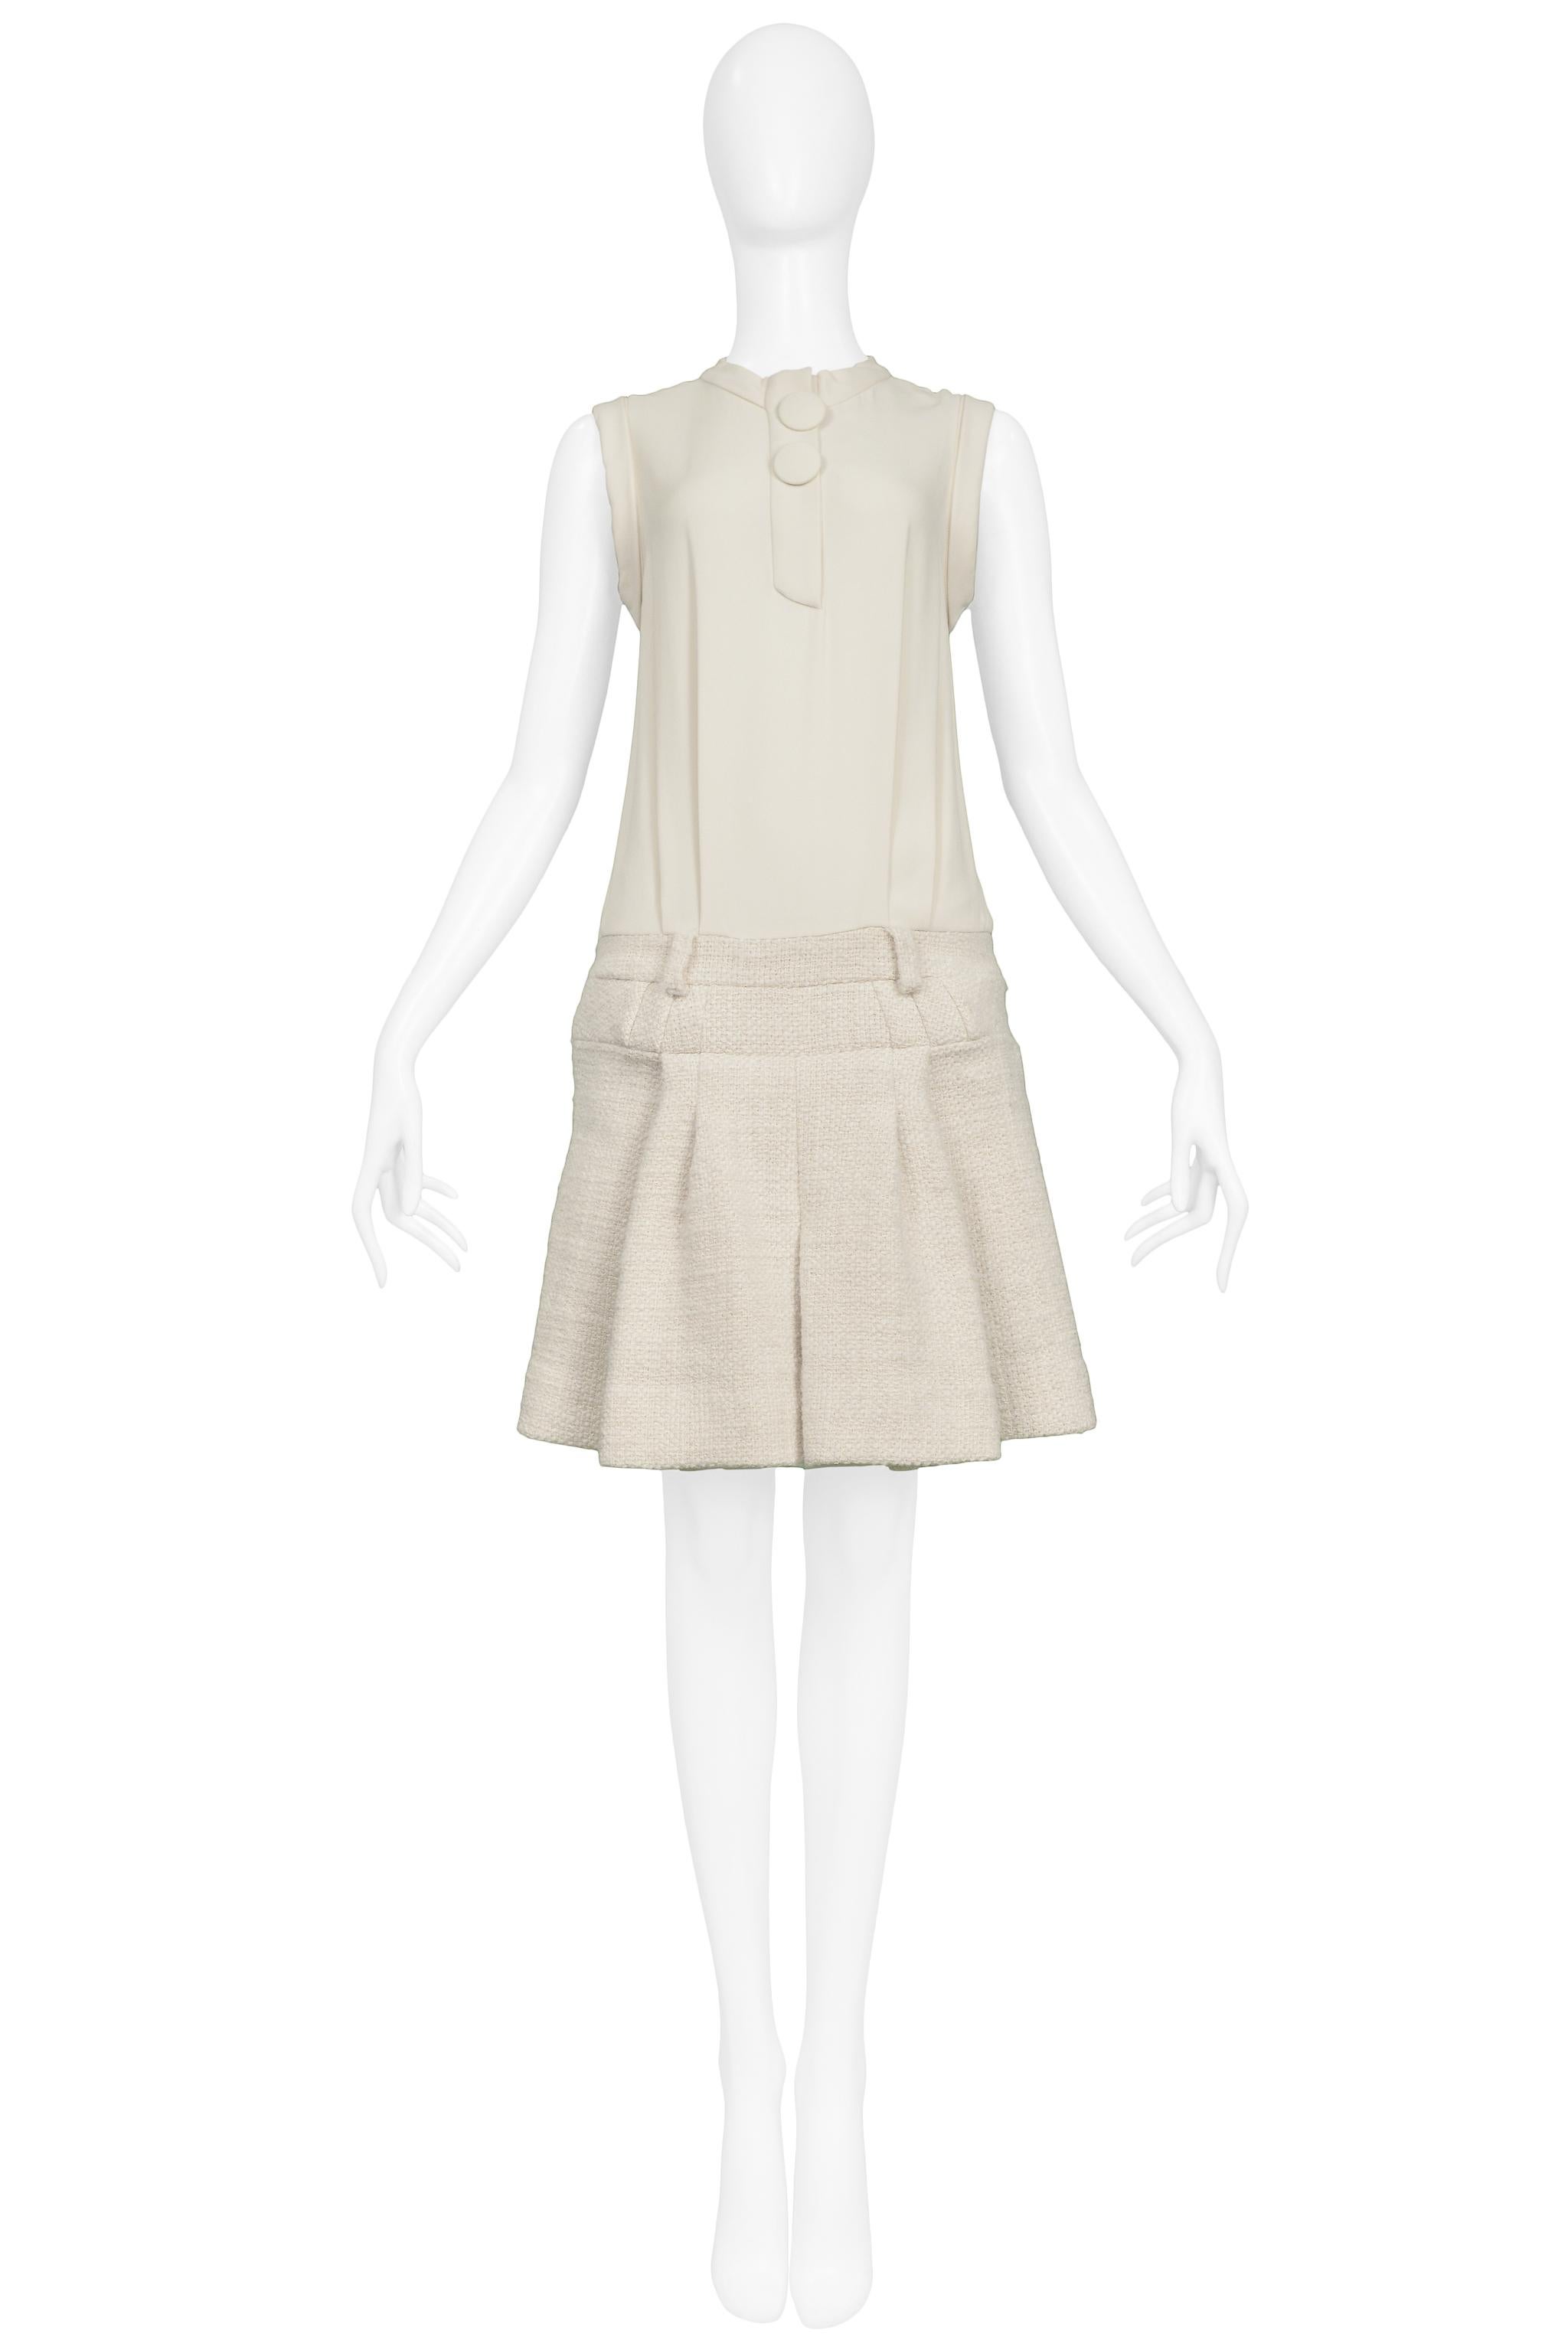 
Resurrection Vintage is excited to offer a vintage Nicolas Ghesquière for Balenciaga off-white silk and wool dress featuring a silk top, large buttons, box pleat skirt and above the knee length.

Balenciaga Paris
Designed by Nicolas Ghesquiere
Size